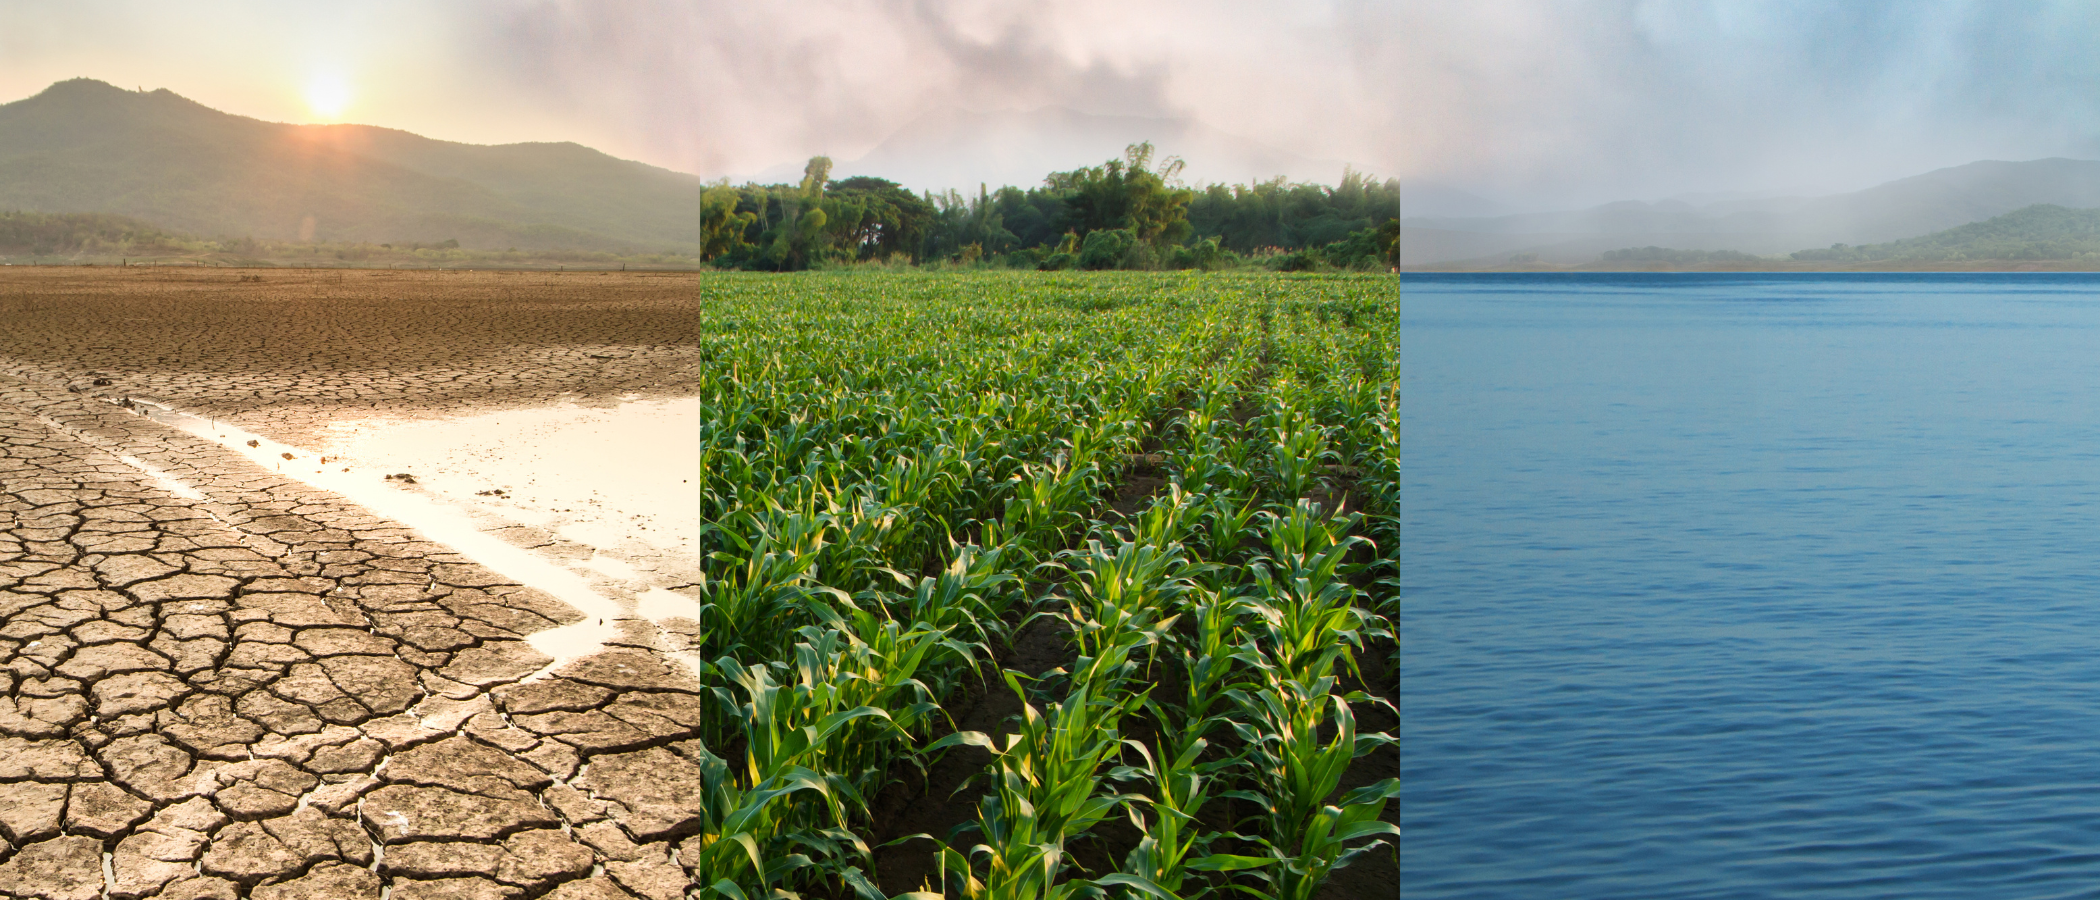 3 images showing drought, healthy crops and ocean